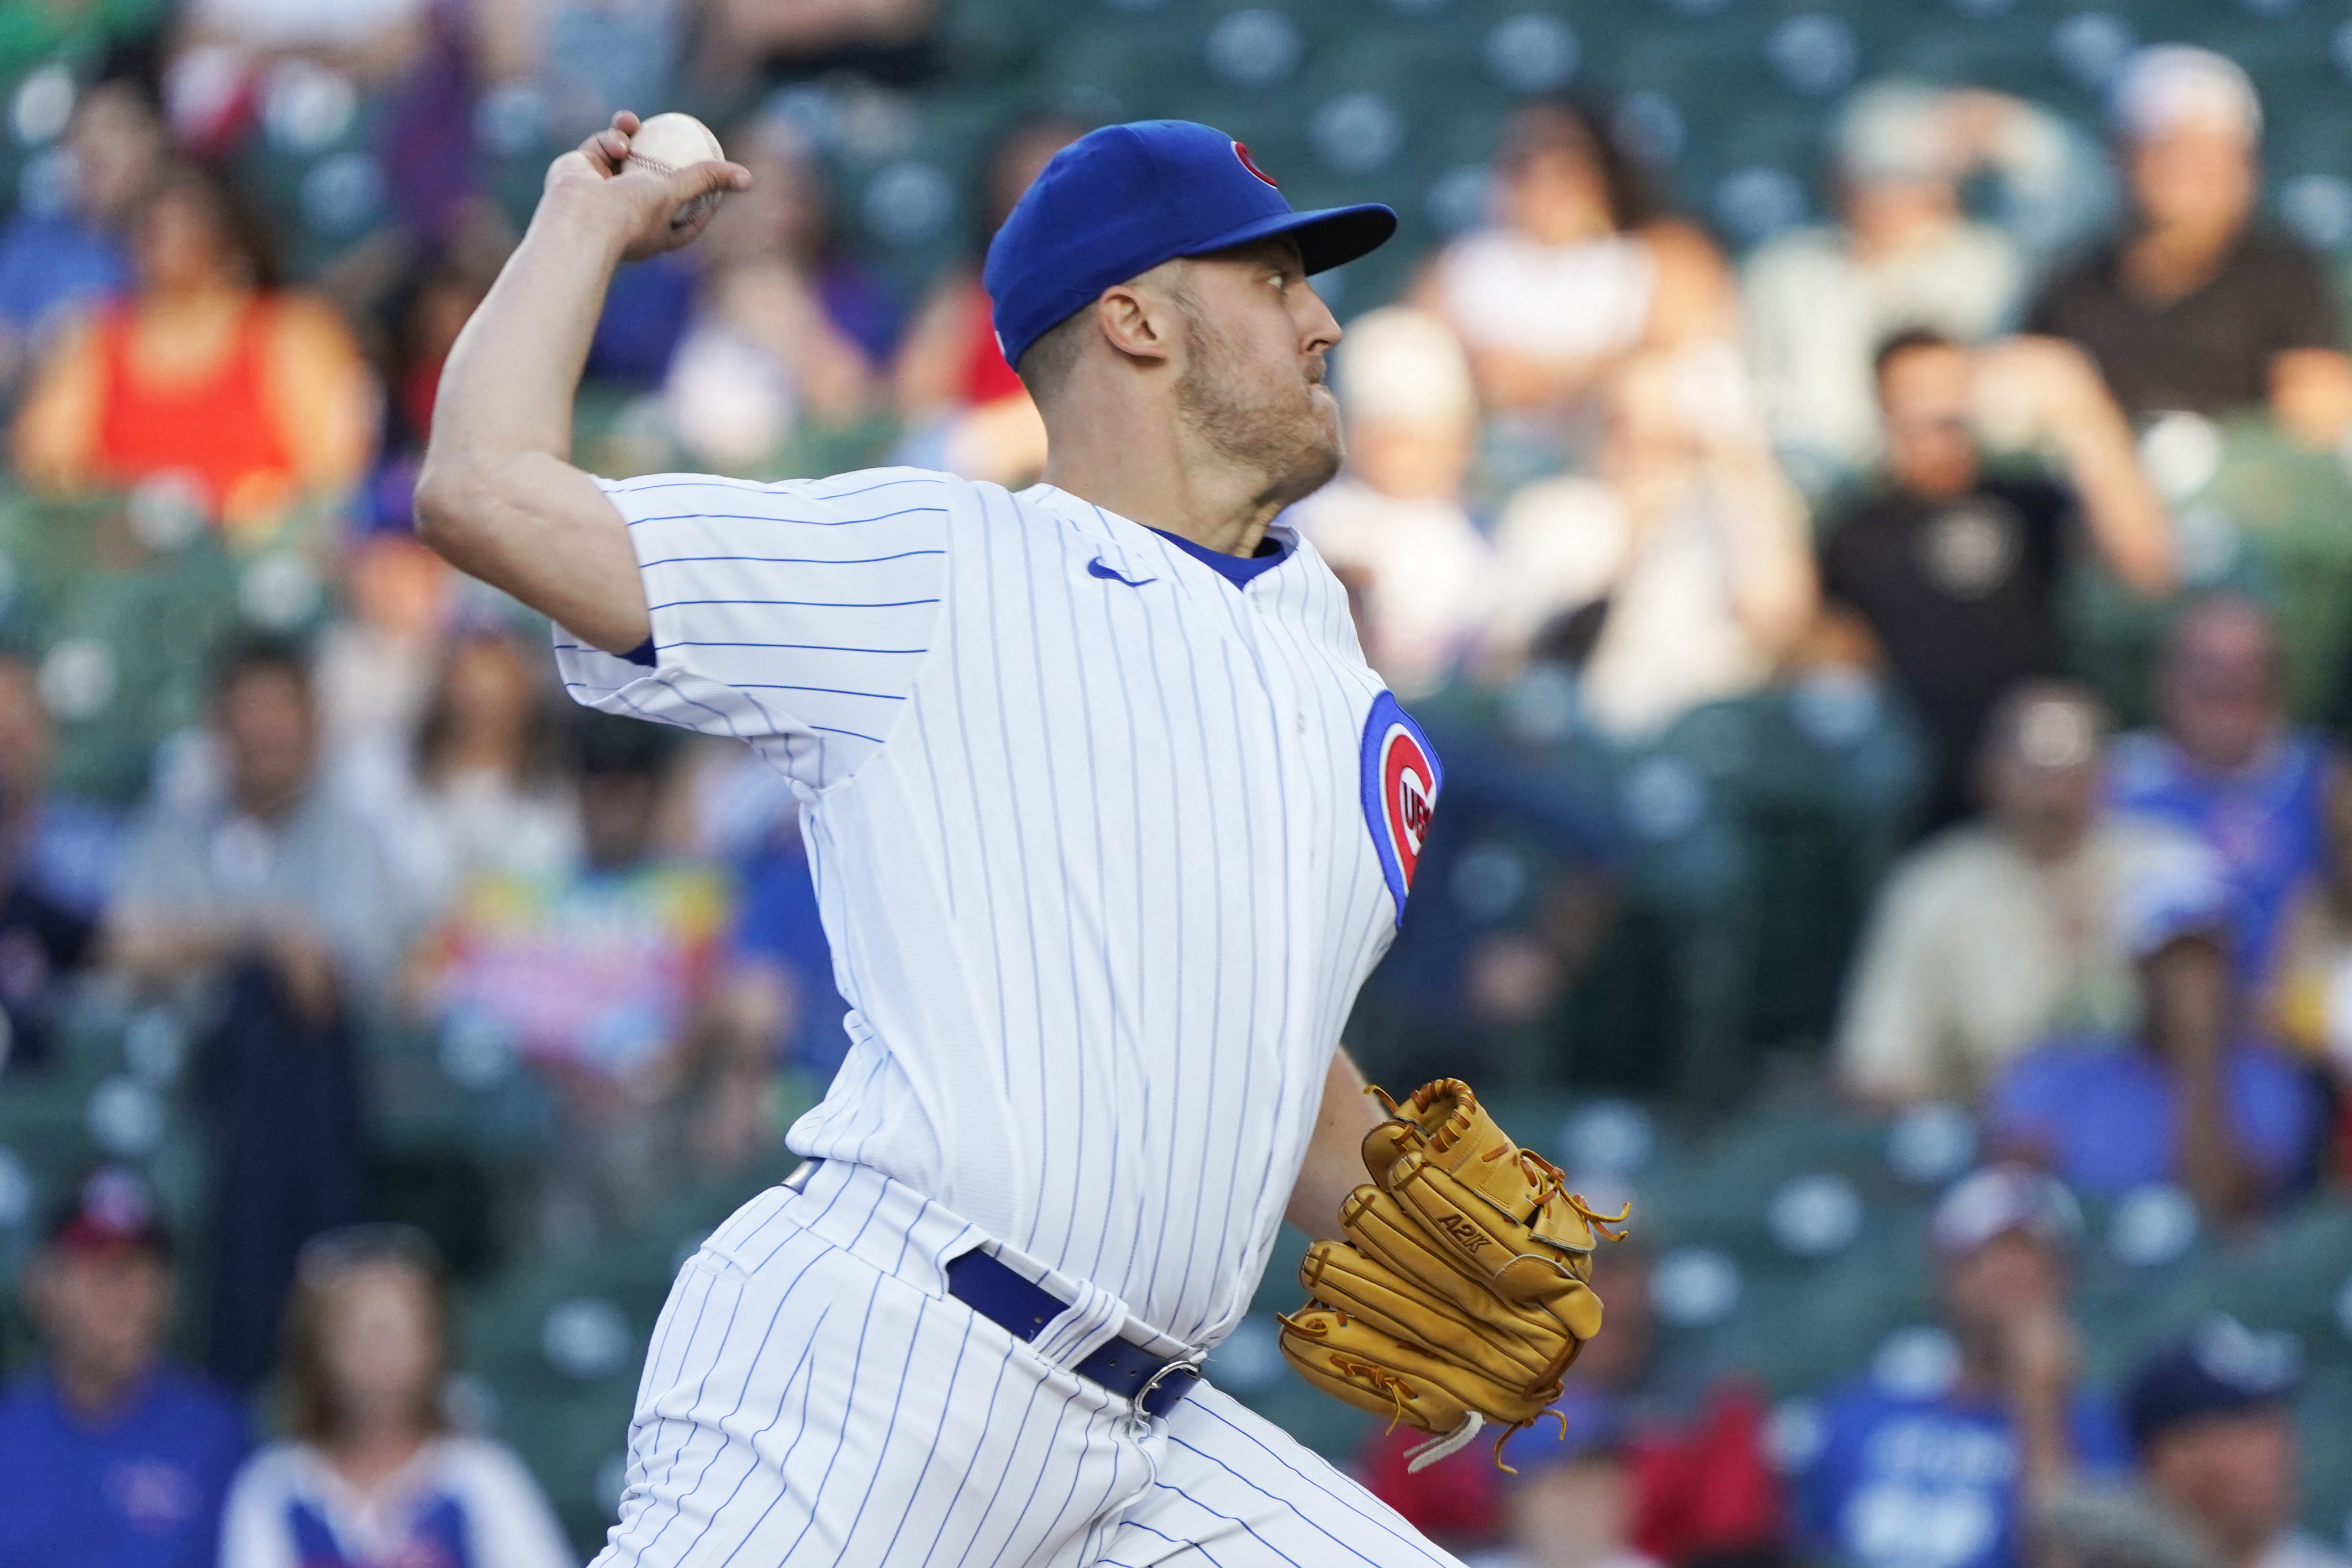 Patrick Wisdom is Pulling the Cubs to a Surprising Start